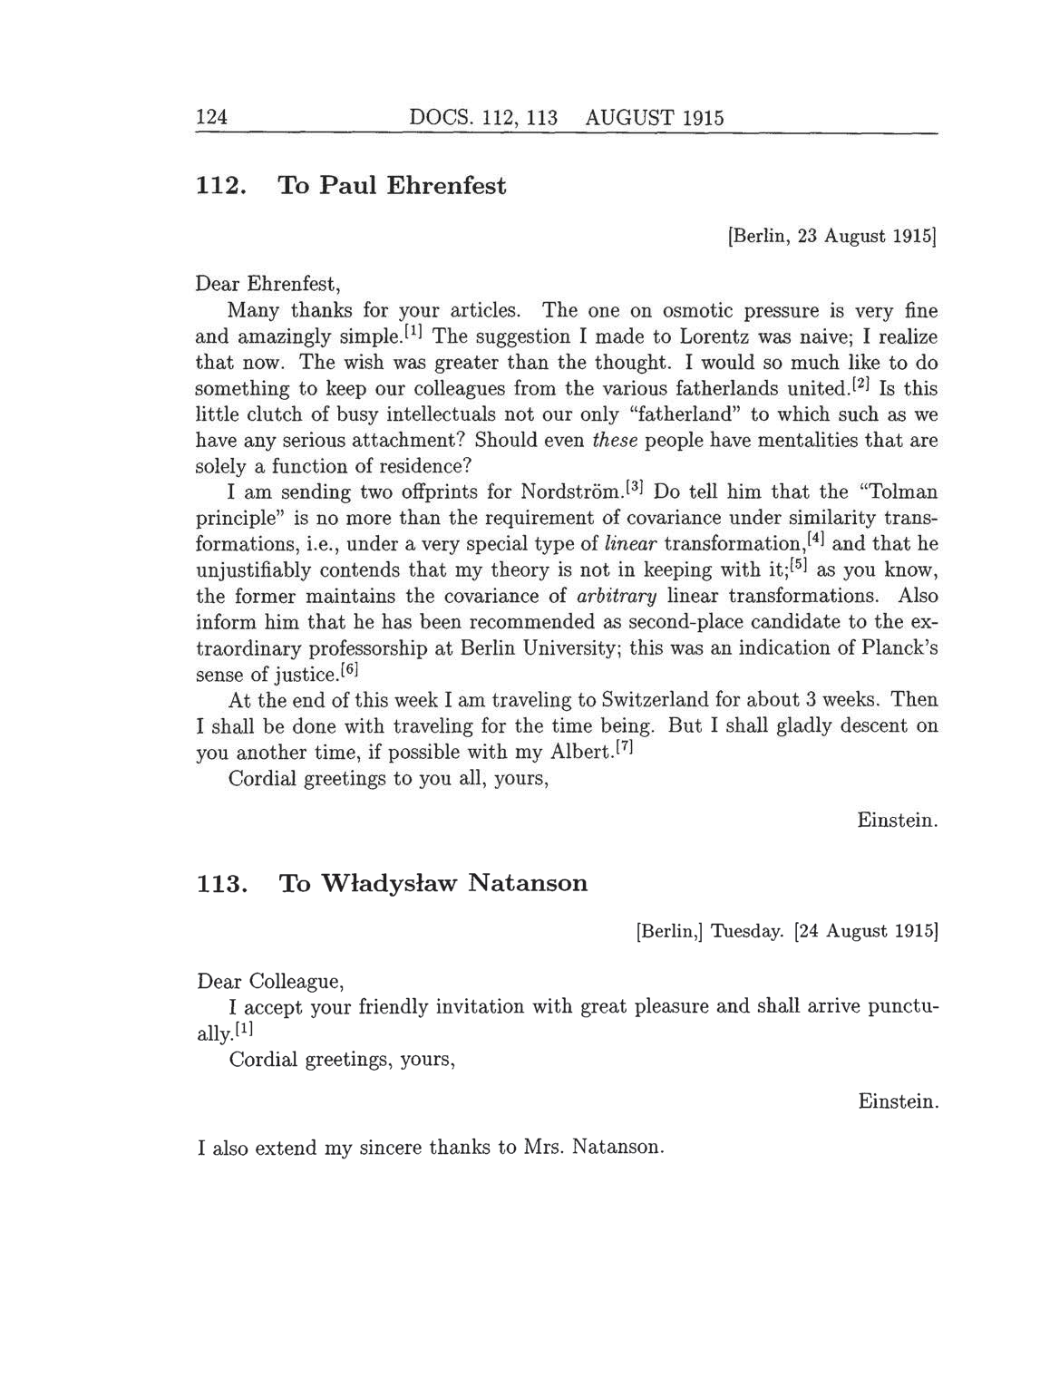 Volume 8: The Berlin Years: Correspondence, 1914-1918 (English translation supplement) page 124